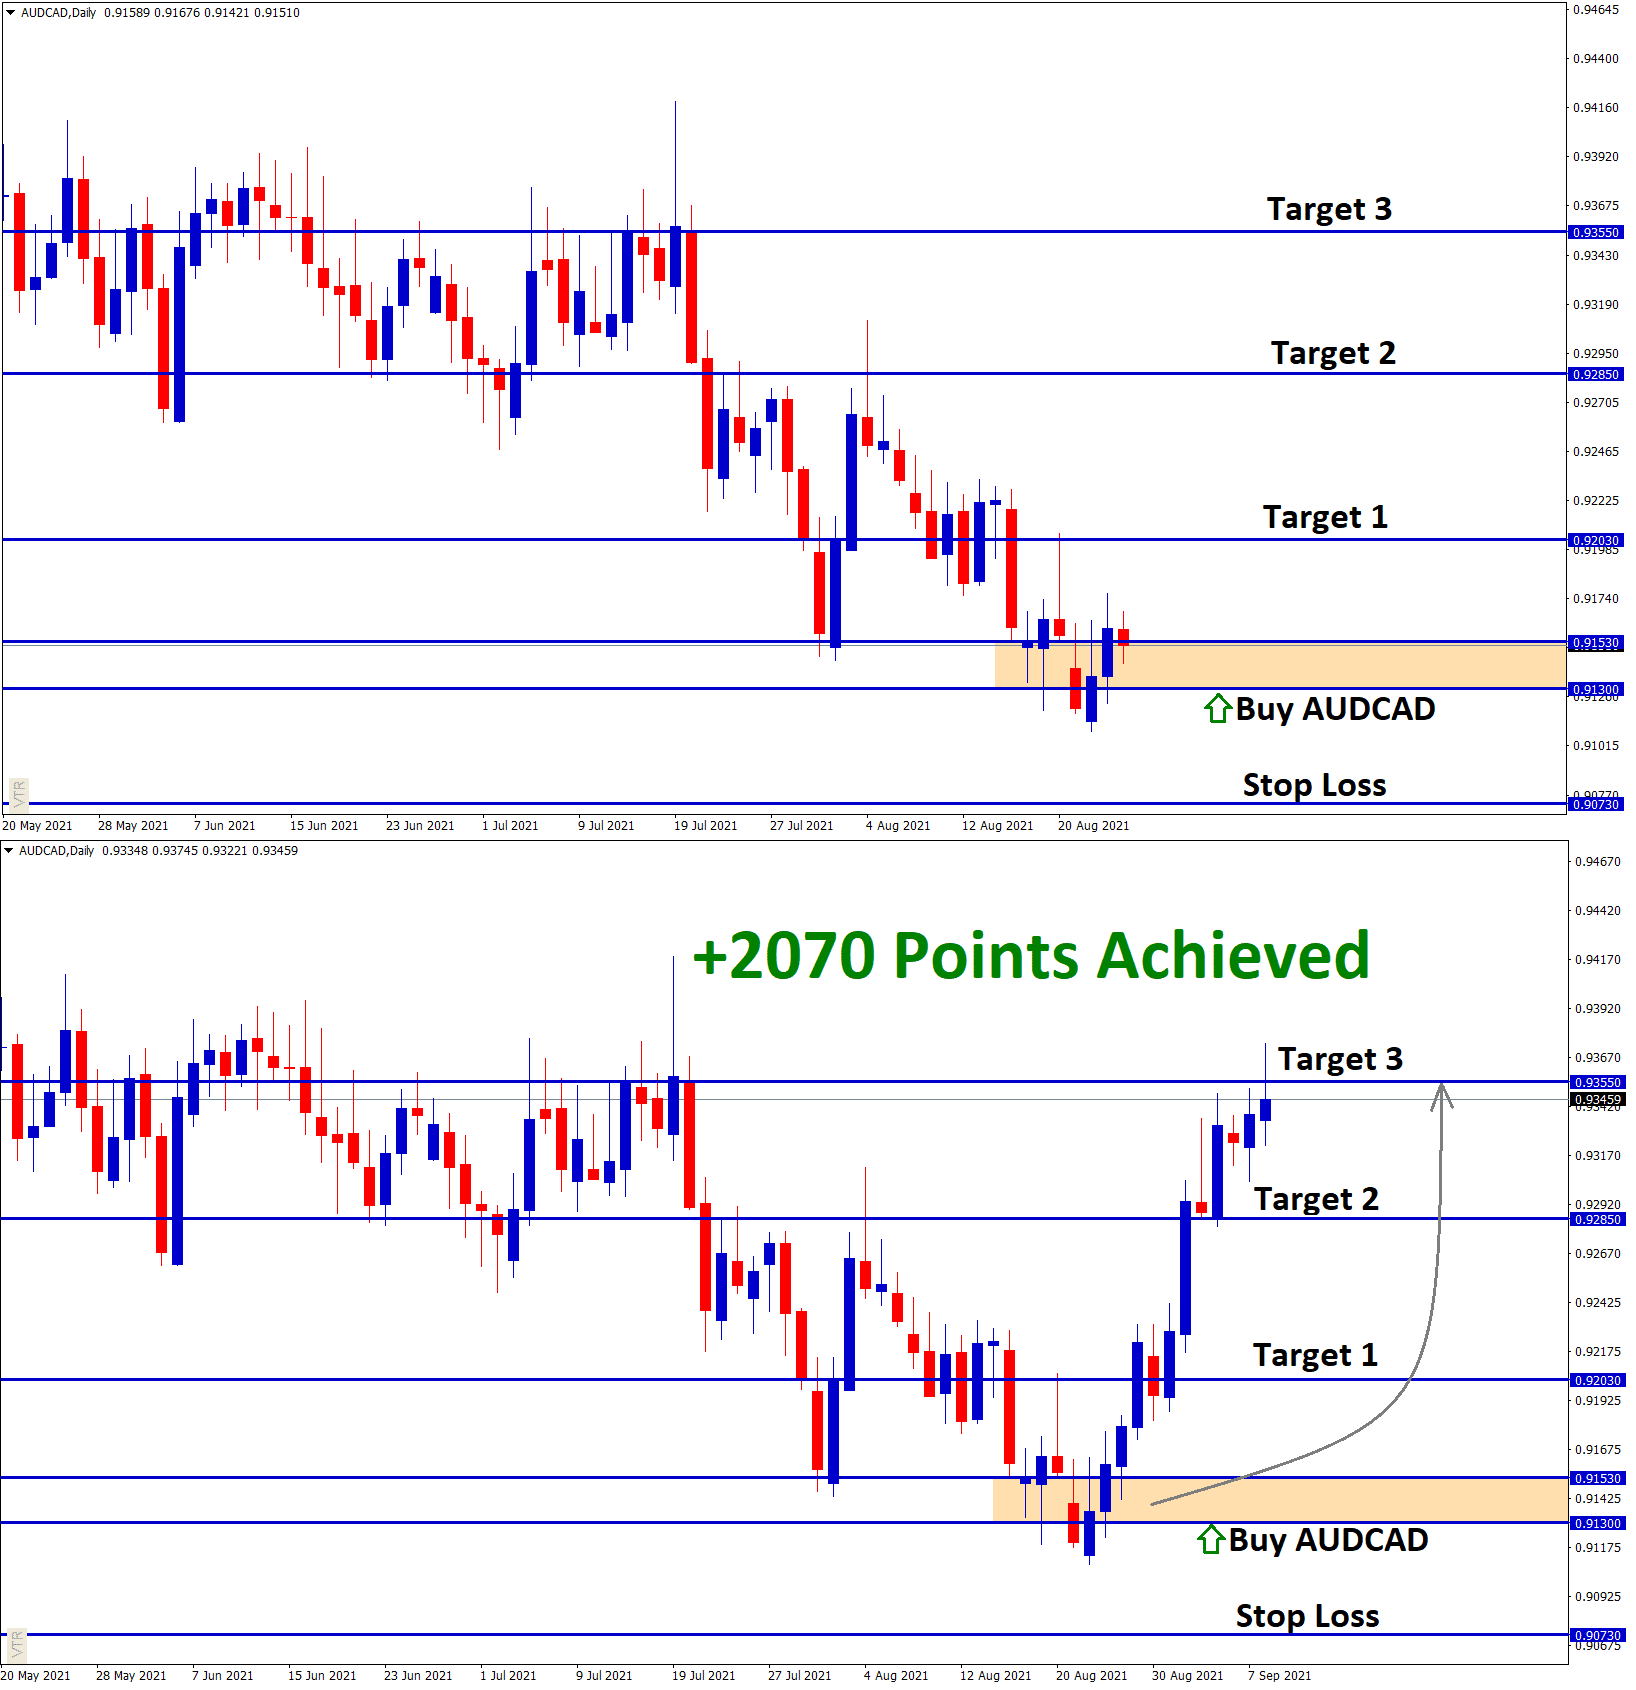 2070 points reached in AUDCAD Buy signal reaching third target